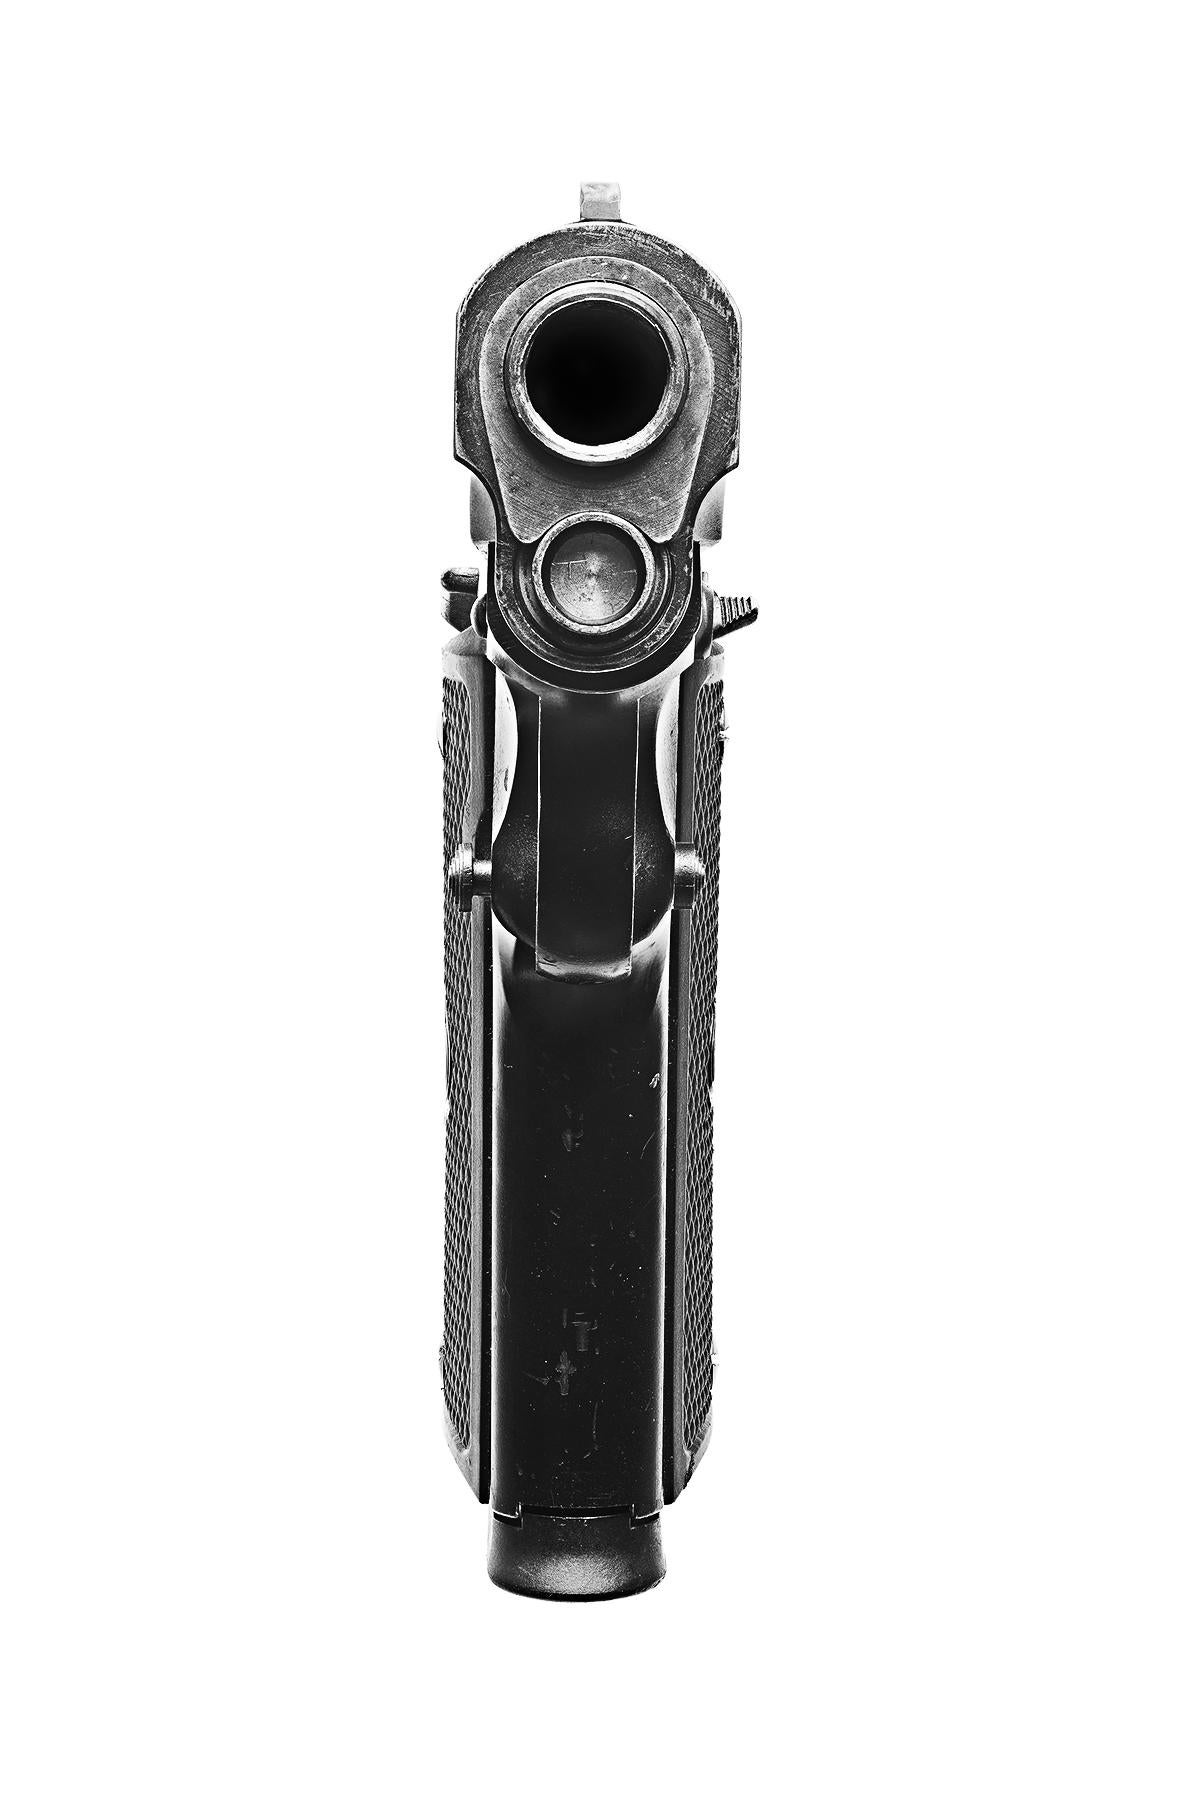 Colt 1911
Digital C-Print / Archival Pigment Print
Edition of 20 per size
Available sizes:
36 x 72 in
48 x 96 in

In Point Blank, Lusztyk’s magnification of handguns at once anthropomorphizes and abstracts its subject to create demystified portraits